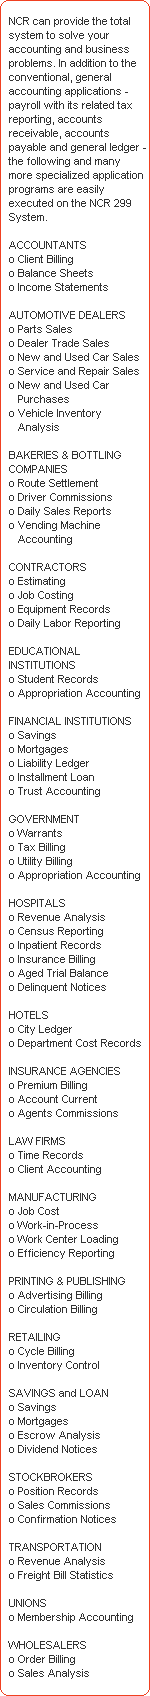 NCR can provide the total 
   system to solve your 
   accounting and business 
   problems. In addition to the 
   conventional, general 
   accounting applications - 
   payroll with its related tax 
   reporting, accounts 
   receivable, accounts 
   payable and general ledger - 
   the following and many 
   more specialized application 
   programs are easily 
   executed on the NCR 299 
   System.

   ACCOUNTANTS 
   o Client Billing 
   o Balance Sheets 
   o Income Statements 

   AUTOMOTIVE DEALERS 
   o Parts Sales 
   o Dealer Trade Sales 
   o New and Used Car Sales 
   o Service and Repair Sales 
   o New and Used Car 
      Purchases 
   o Vehicle Inventory 
      Analysis 

   BAKERIES & BOTTLING 
   COMPANIES 
   o Route Settlement 
   o Driver Commissions 
   o Daily Sales Reports 
   o Vending Machine 
      Accounting 

   CONTRACTORS 
   o Estimating 
   o Job Costing 
   o Equipment Records 
   o Daily Labor Reporting 

   EDUCATIONAL 
   INSTITUTIONS 
   o Student Records 
   o Appropriation Accounting 

   FINANCIAL INSTITUTIONS 
   o Savings 
   o Mortgages 
   o Liability Ledger 
   o Installment Loan 
   o Trust Accounting 

   GOVERNMENT 
   o Warrants 
   o Tax Billing 
   o Utility Billing 
   o Appropriation Accounting 

   HOSPITALS 
   o Revenue Analysis 
   o Census Reporting 
   o Inpatient Records 
   o Insurance Billing 
   o Aged Trial Balance 
   o Delinquent Notices 

   HOTELS 
   o City Ledger 
   o Department Cost Records 

   INSURANCE AGENCIES 
   o Premium Billing 
   o Account Current 
   o Agents Commissions 

   LAW FIRMS 
   o Time Records 
   o Client Accounting 

   MANUFACTURING 
   o Job Cost 
   o Work-in-Process 
   o Work Center Loading 
   o Efficiency Reporting 

   PRINTING & PUBLISHING 
   o Advertising Billing 
   o Circulation Billing 

   RETAILING 
   o Cycle Billing 
   o Inventory Control 

   SAVINGS and LOAN 
   o Savings 
   o Mortgages 
   o Escrow Analysis 
   o Dividend Notices 

   STOCKBROKERS 
   o Position Records 
   o Sales Commissions 
   o Confirmation Notices 

   TRANSPORTATION 
   o Revenue Analysis 
   o Freight Bill Statistics 

   UNIONS 
   o Membership Accounting 

   WHOLESALERS 
   o Order Billing 
   o Sales Analysis